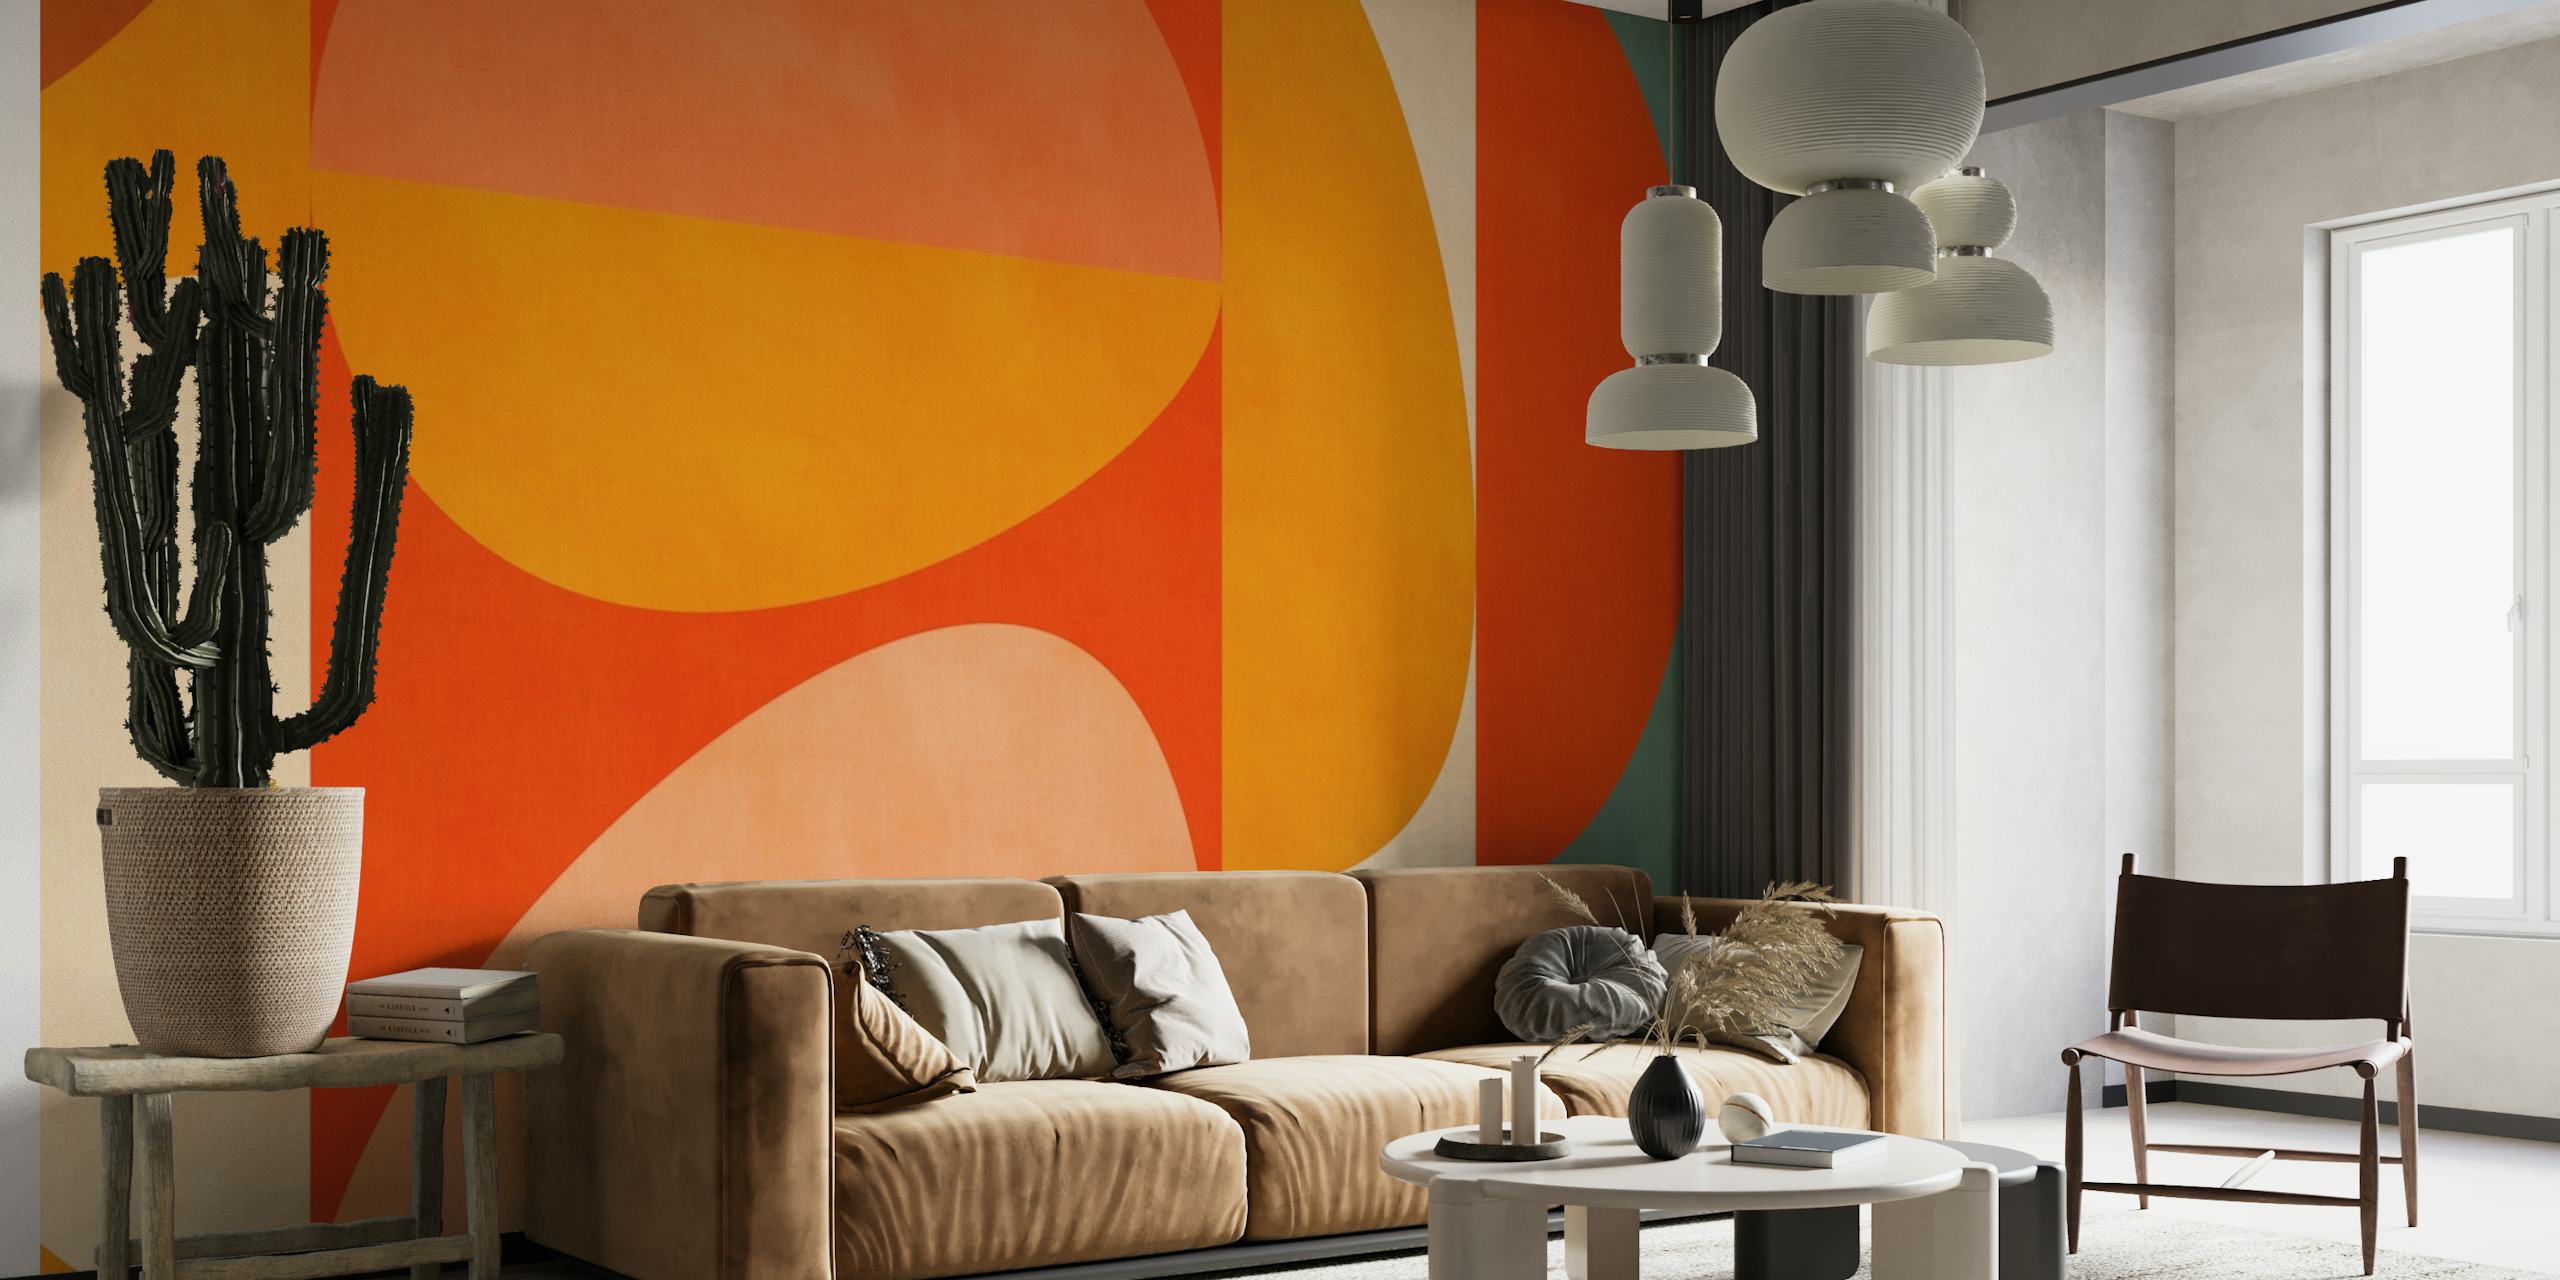 Mid century modern rounded shapes 3:4 ratio wallpaper